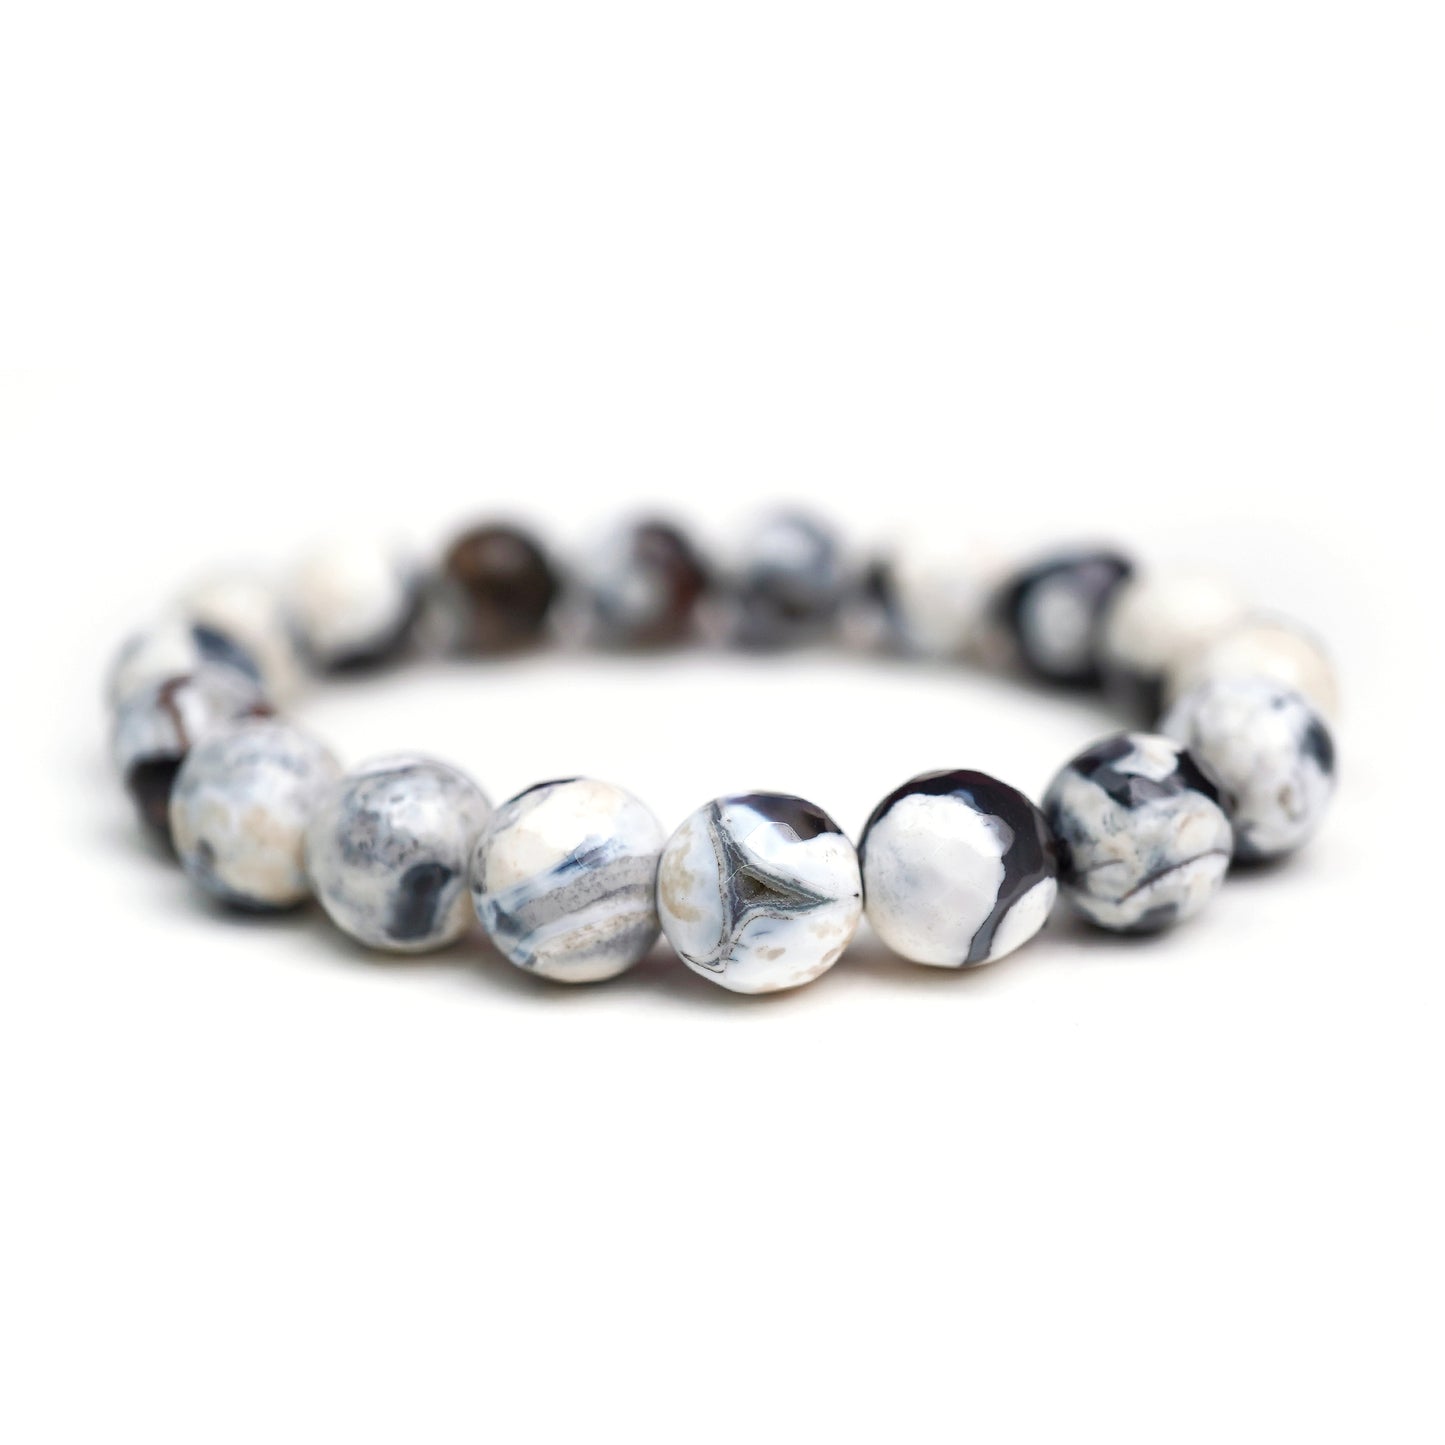 Orca Agate Stretch Bracelet 10mm Faceted